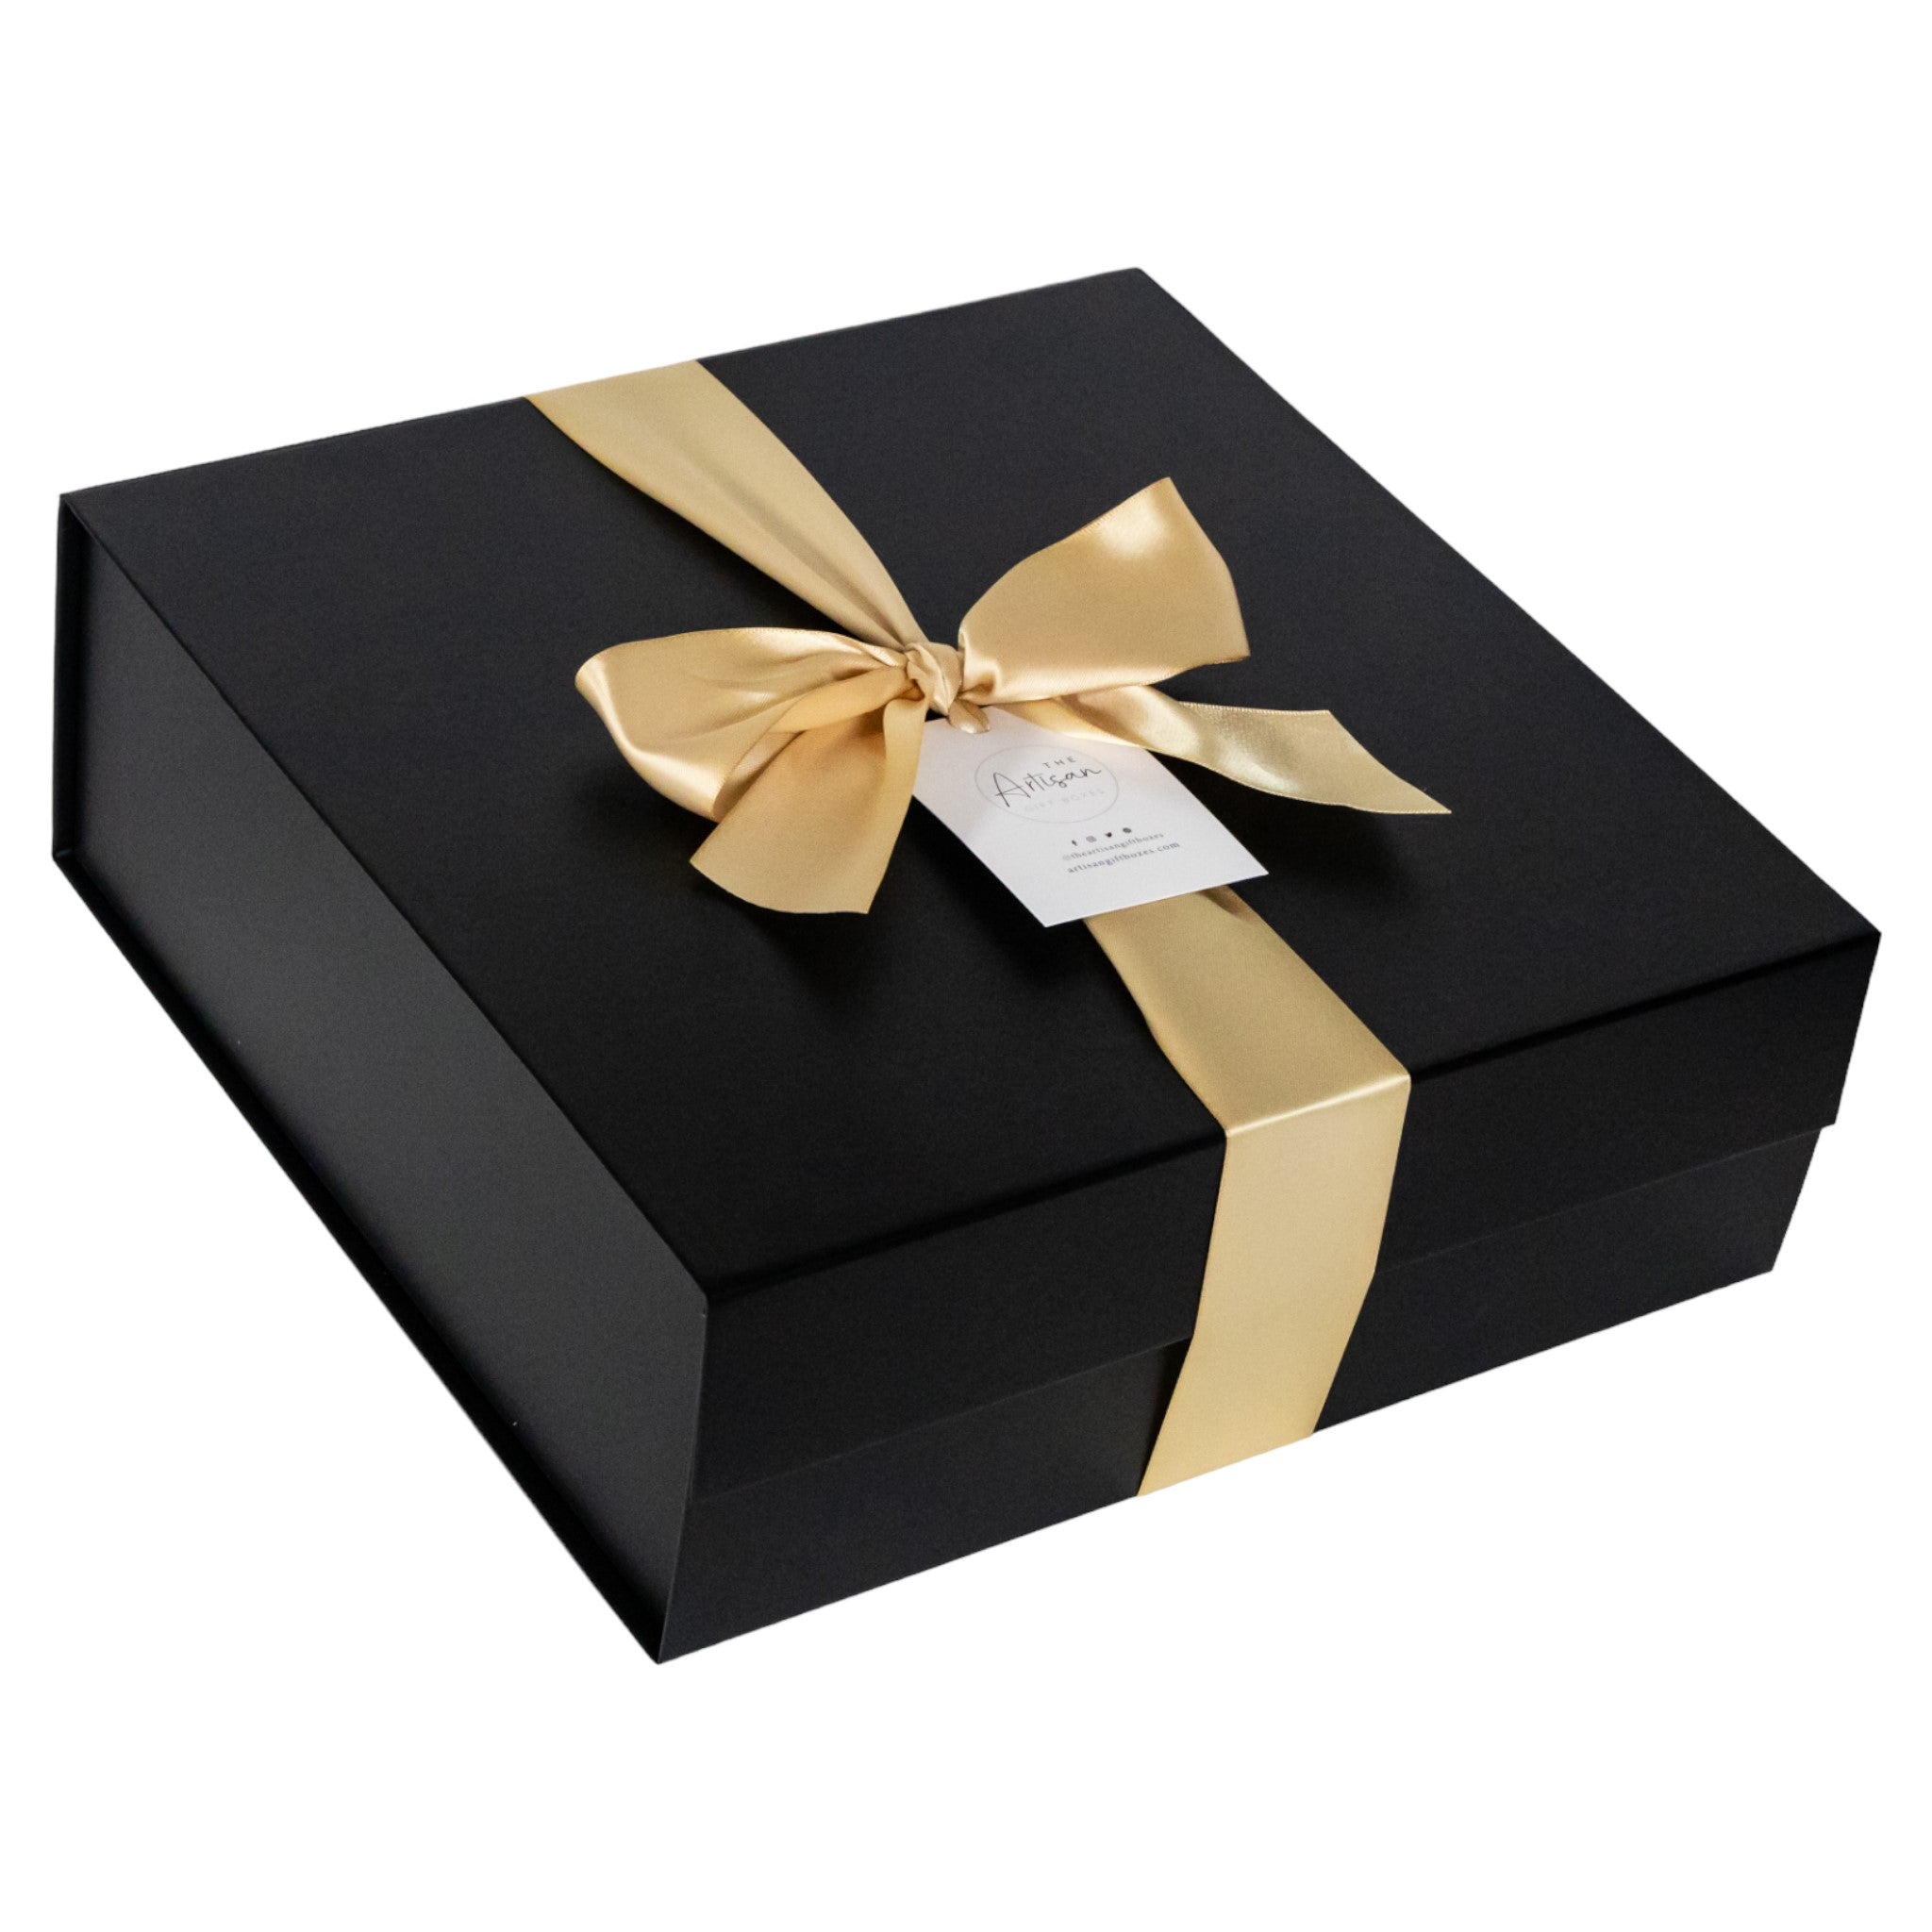 Gourmet Office Gifts | Office Food Gifts | Client Appreciation Gifts